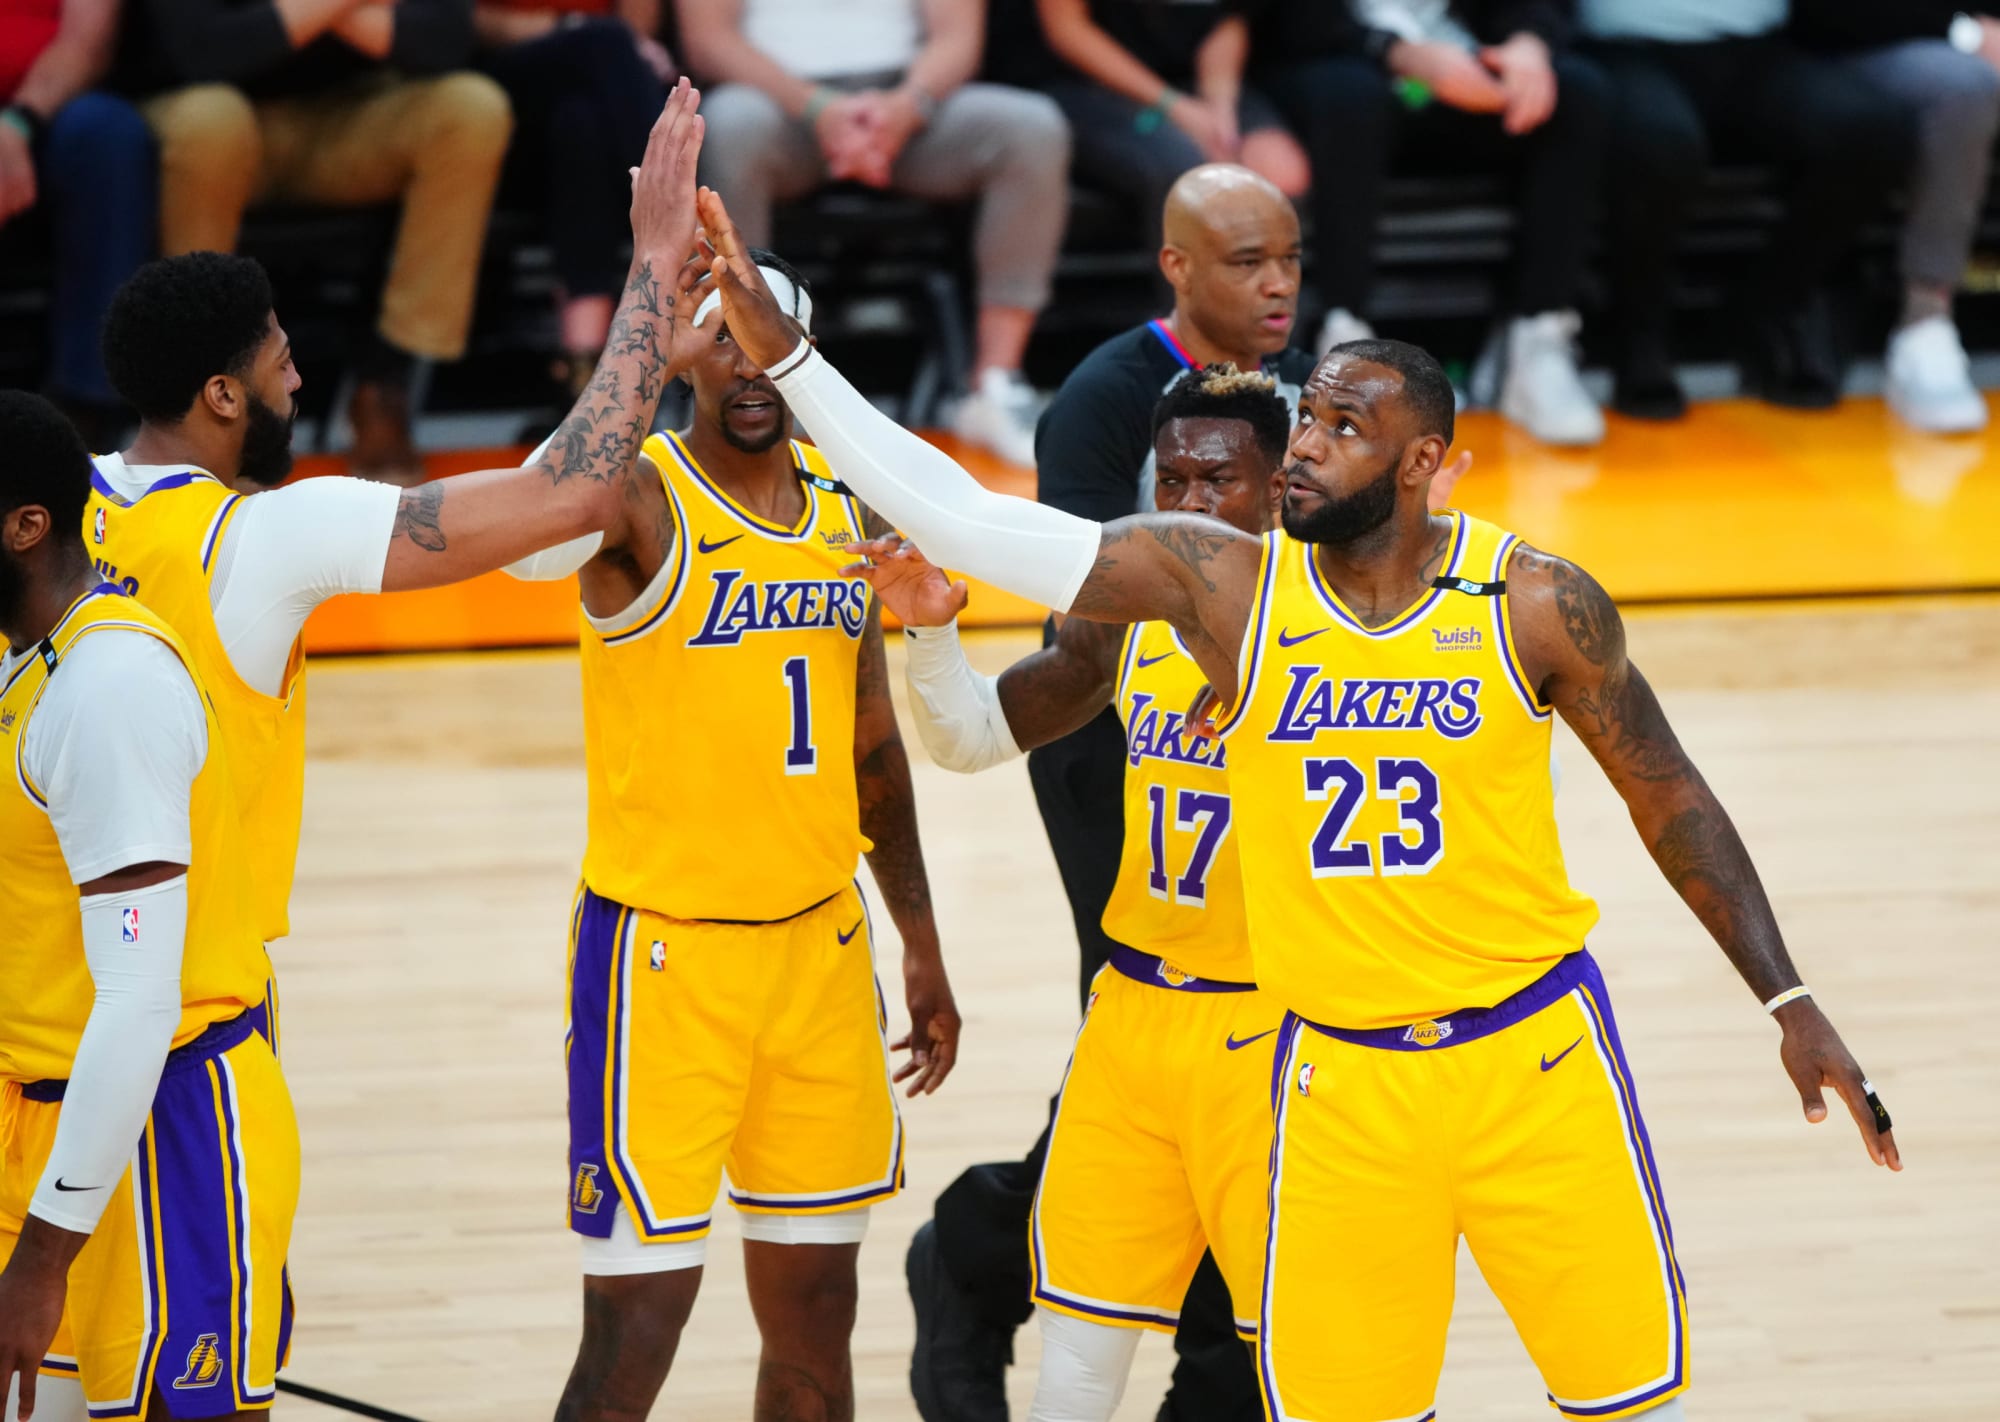 Los Angeles Lakers survive Game 2 to even the series with Phoenix Suns